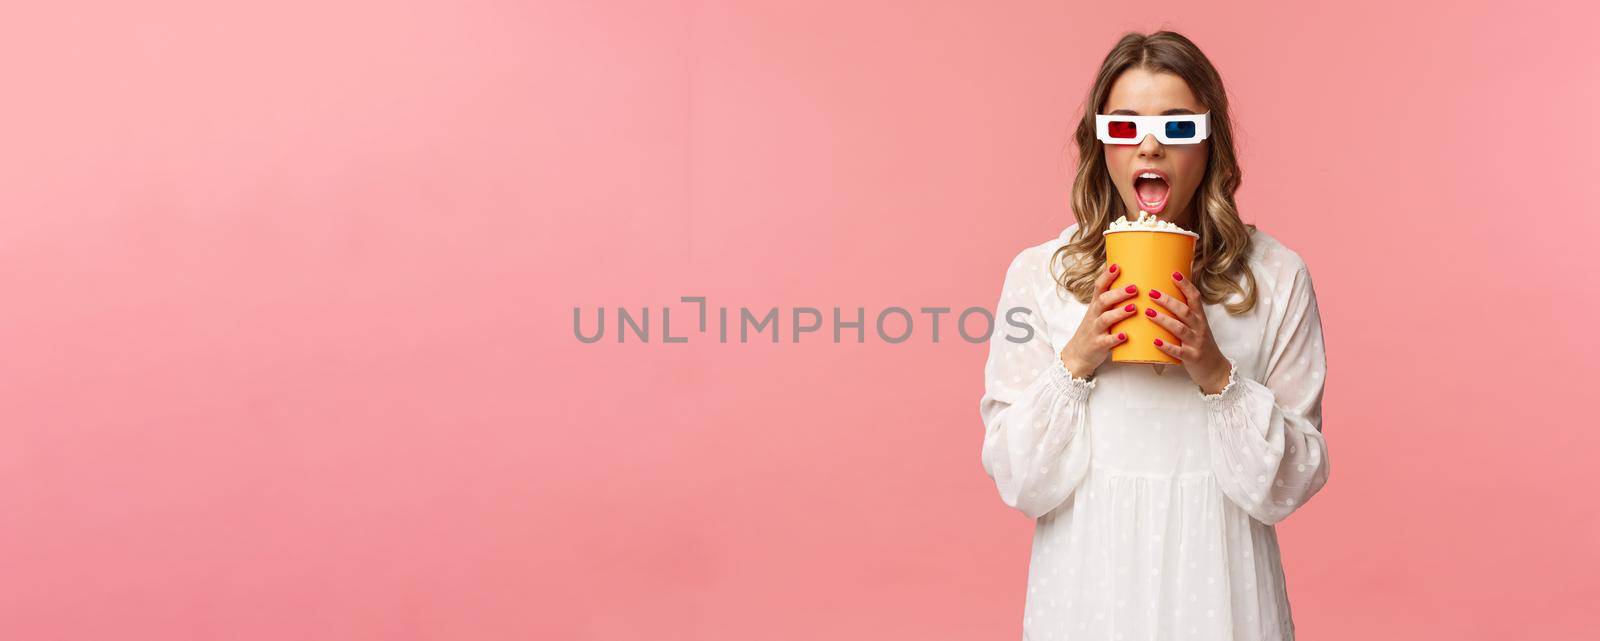 Leisure, going-out and spring concept. Portrait of cute blond funny girl in cinema, eating popcorn from box without hands, looking aside suspicious, wearing 3d glasses, pink background.